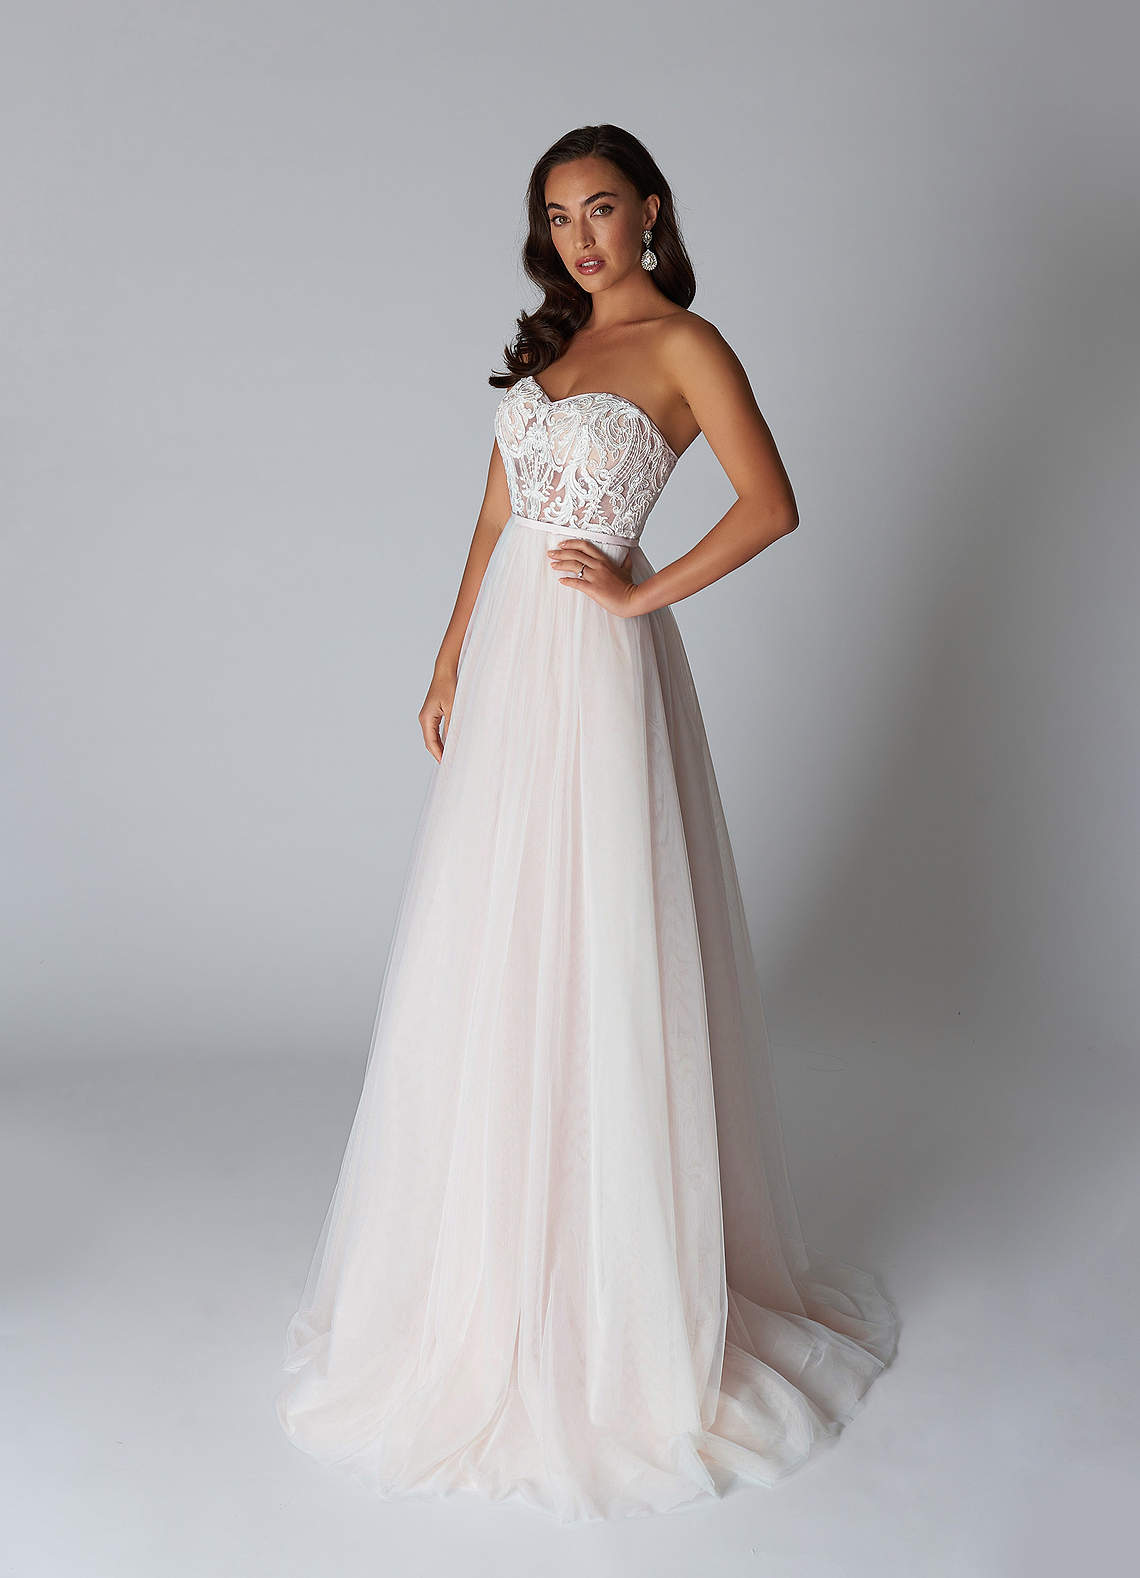 Azazie Arrietty Wedding Dresses Ball-Gown Lace Tulle Floor-Length Dress image1